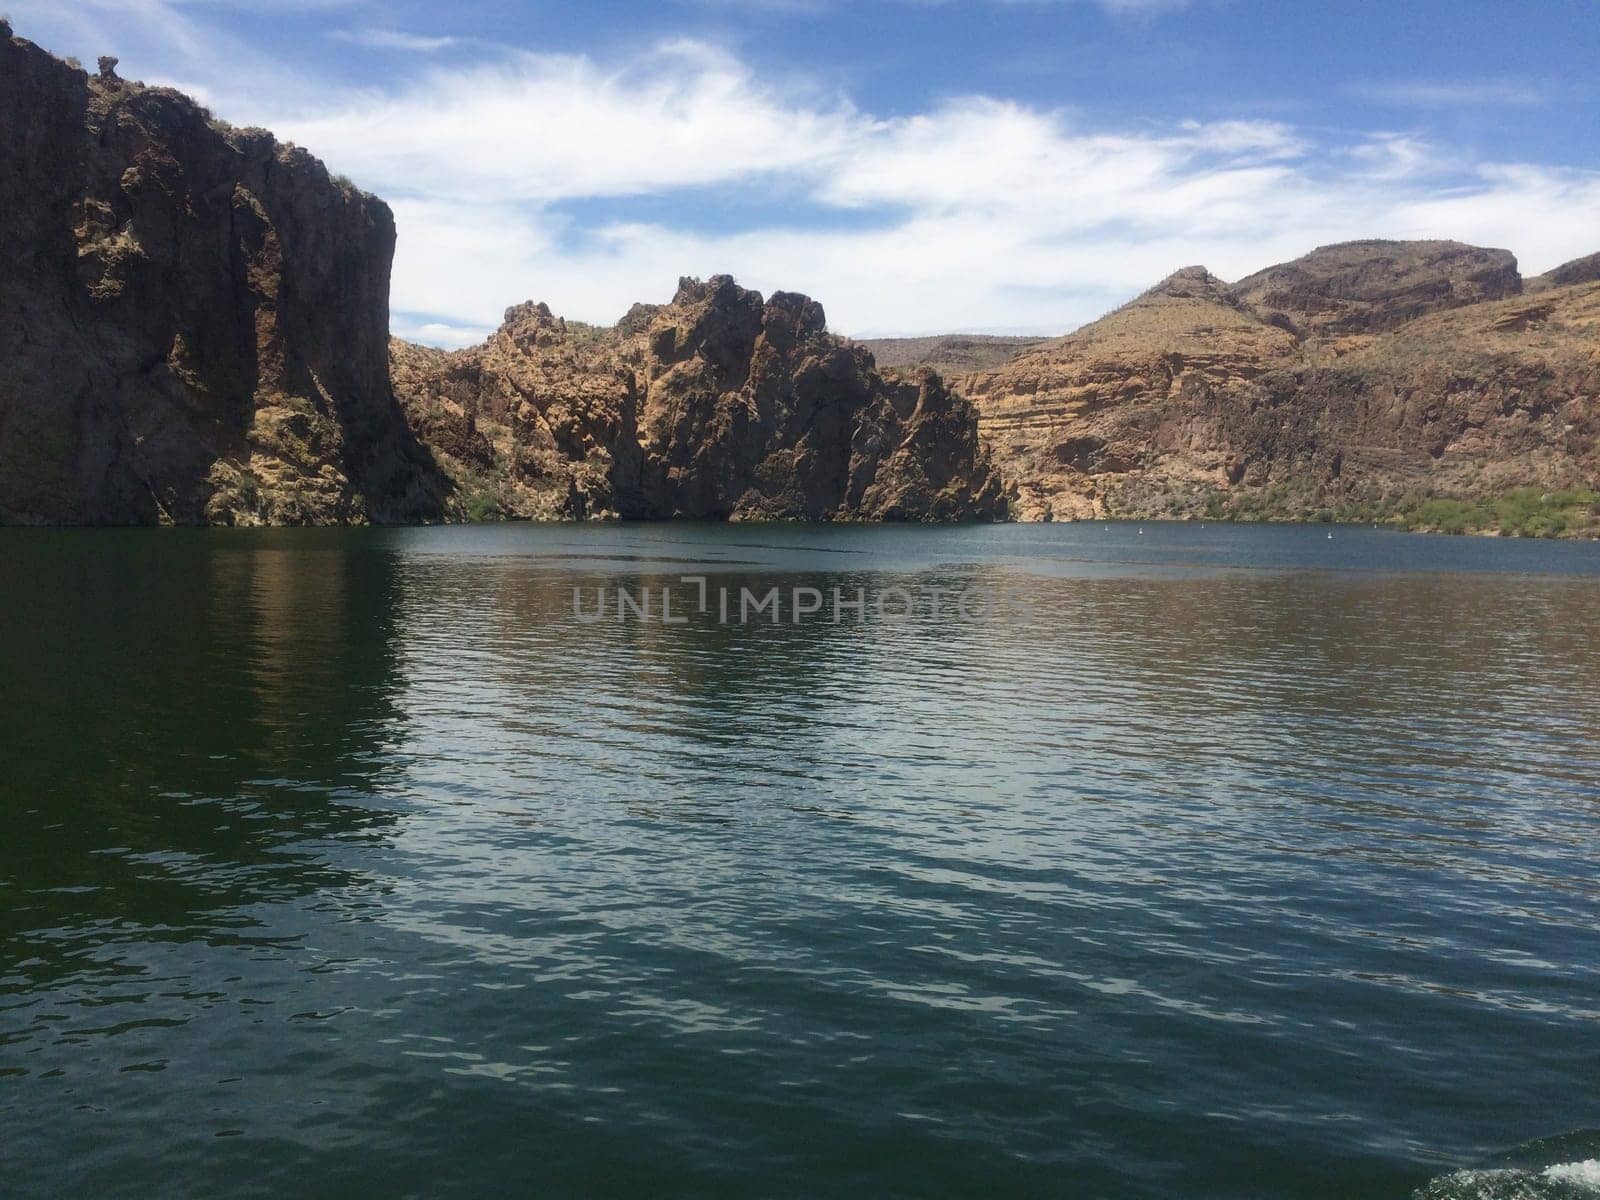 Tranquil Scene, Water in the Desert, Canyon Lake, Arizona, Beautiful Landscape by grumblytumbleweed